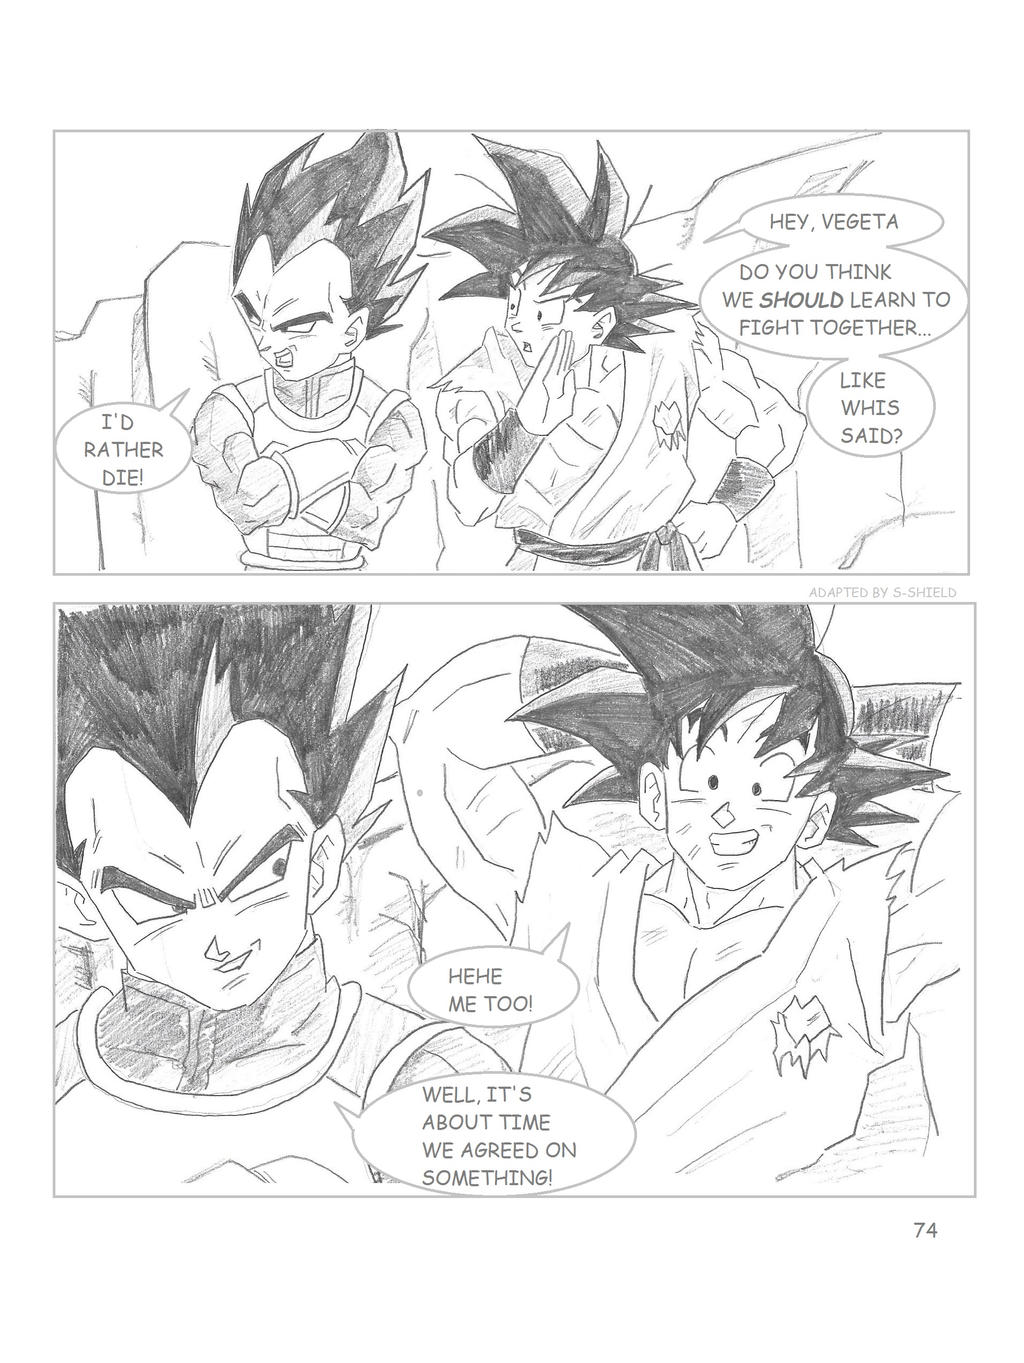 Dragon Ball Super Shares The Sketches Of Chapter 92 Of The Manga - Bullfrag